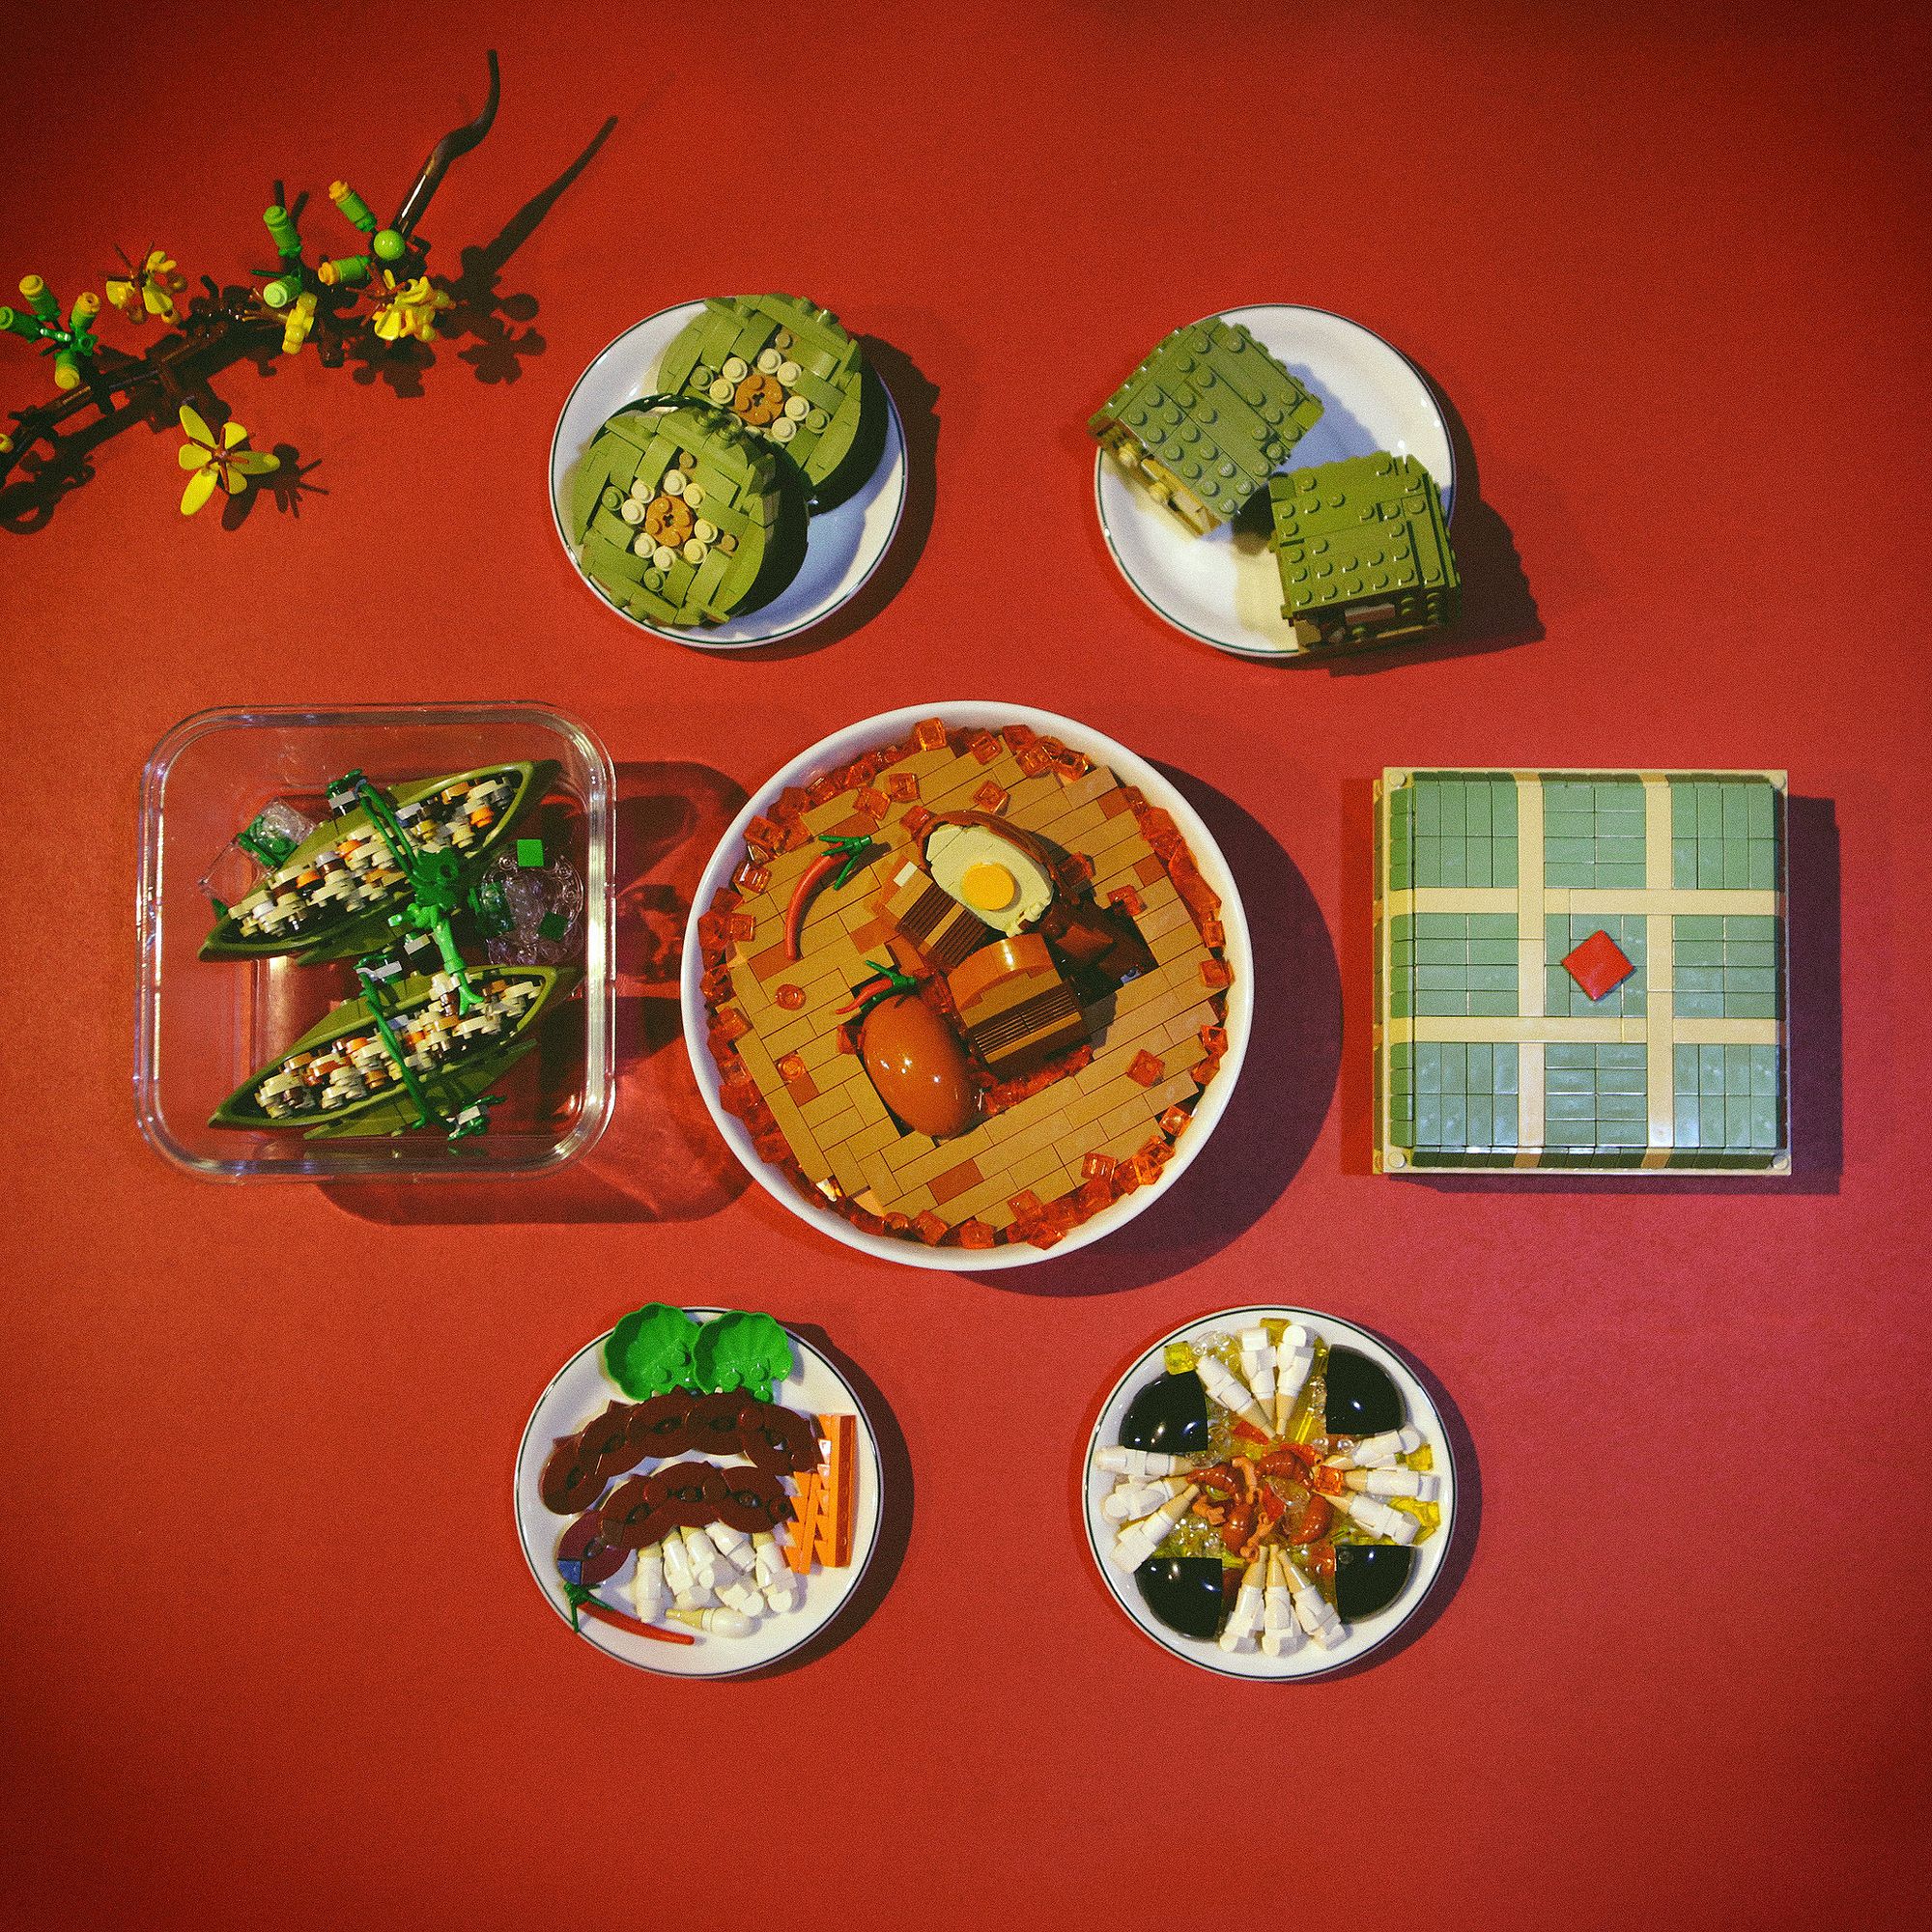 Traditional Lunar New Year's dishes in South Vietnam. Image courtesy: Khang Huynh